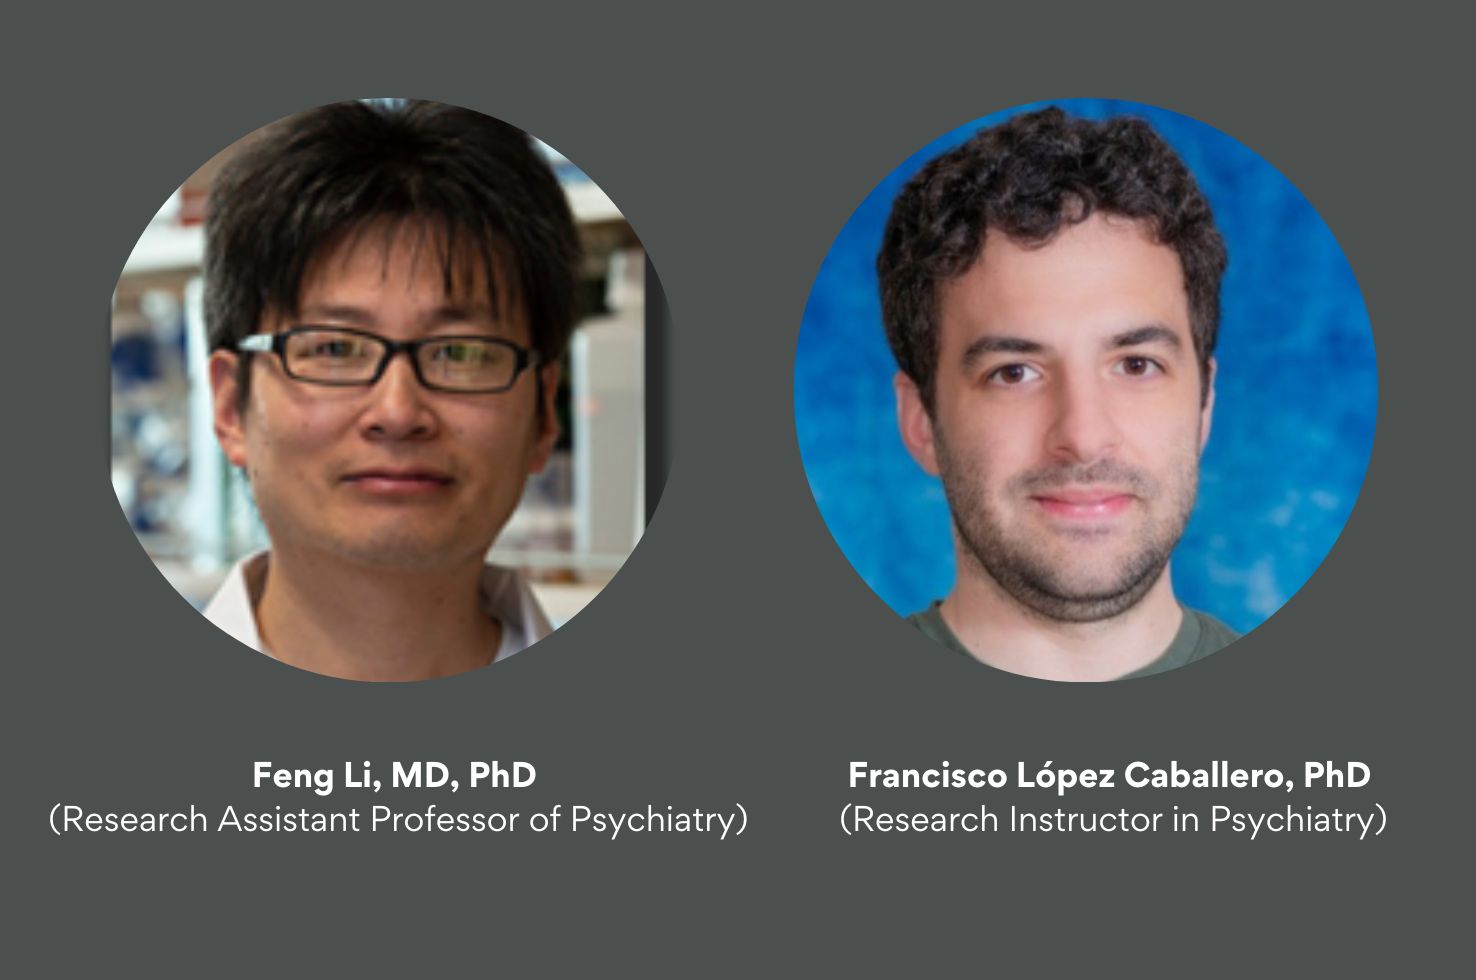 Department of Psychiatry Welcomes Research Faculty Members Feng Li, MD, PhD, and Francisco López Caballero, PhD